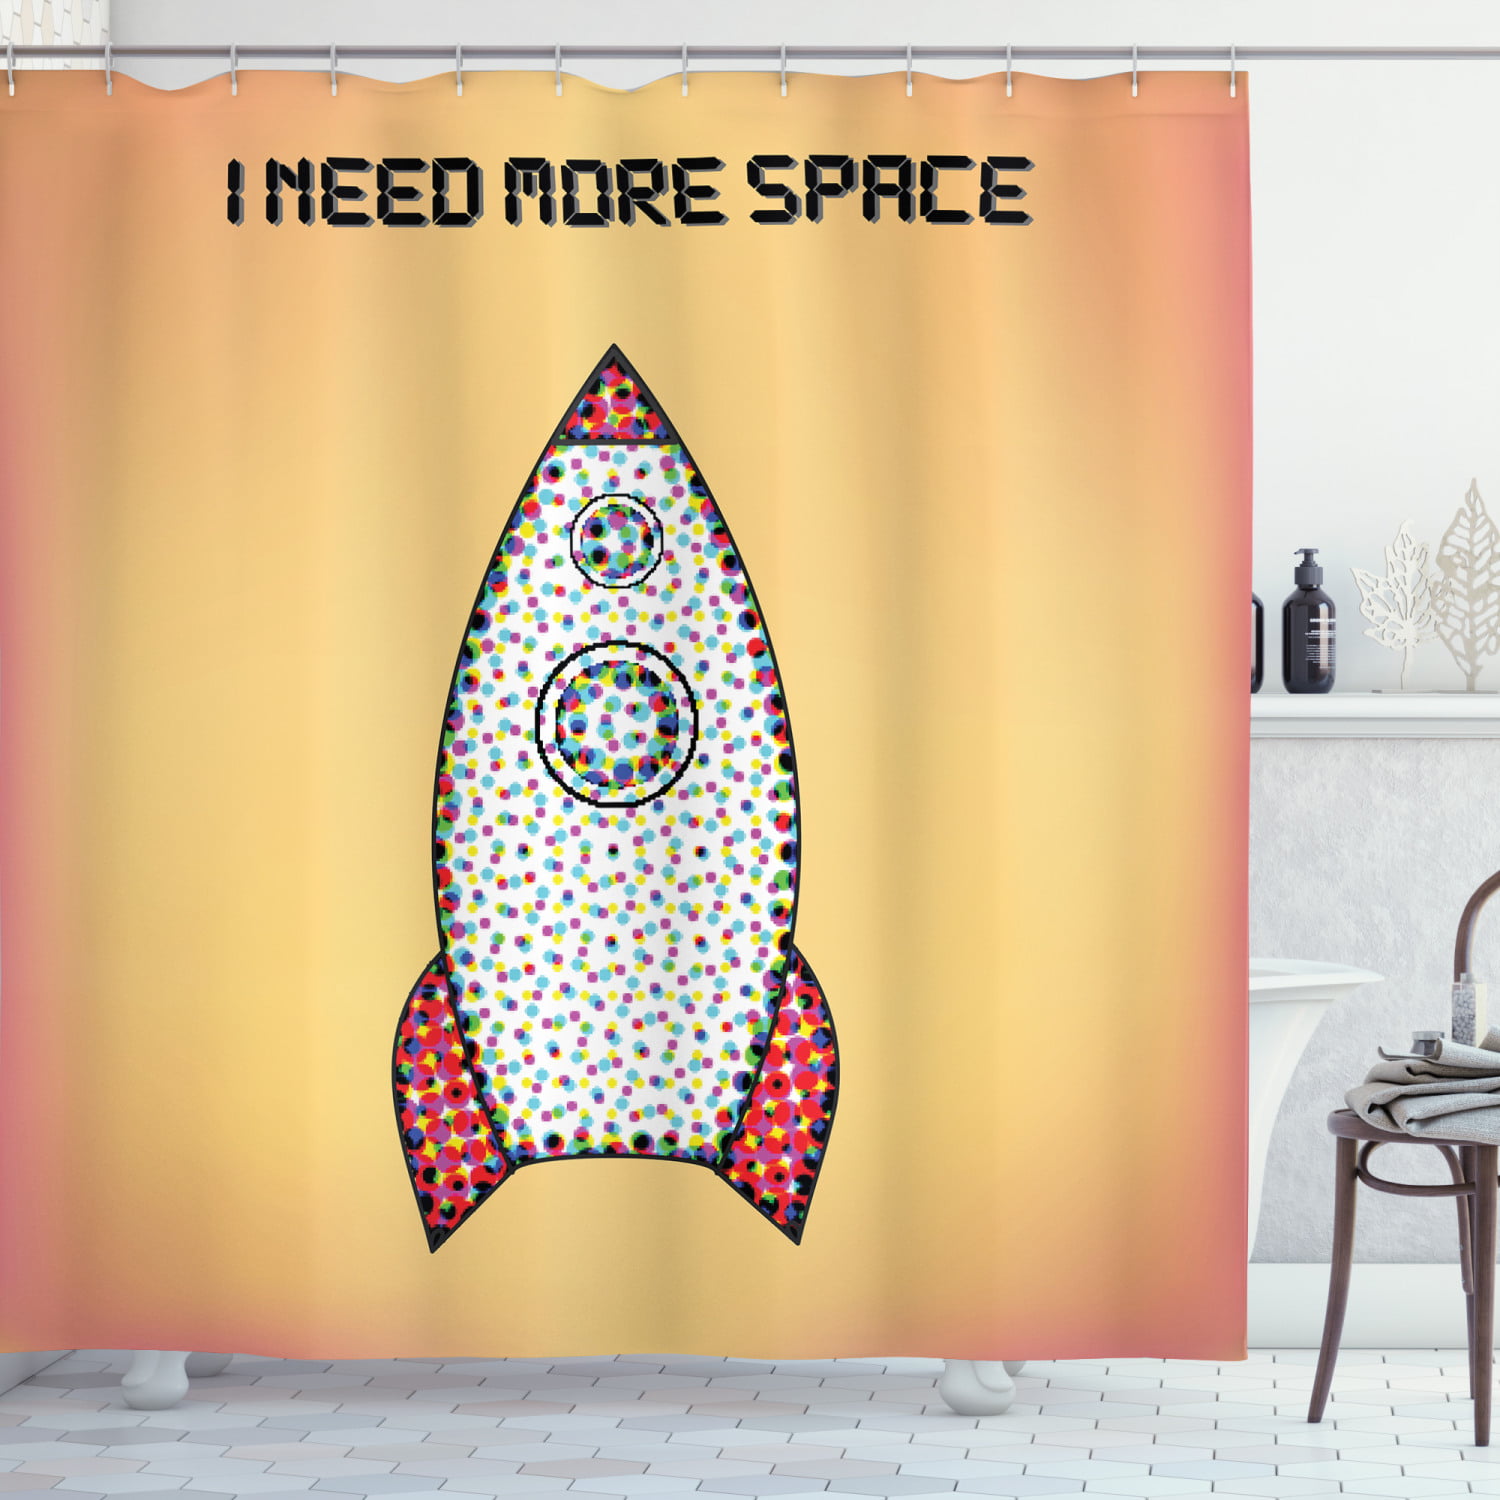 Details about   Outer Space Shower Curtain Cosmos Rocket Print for Bathroom